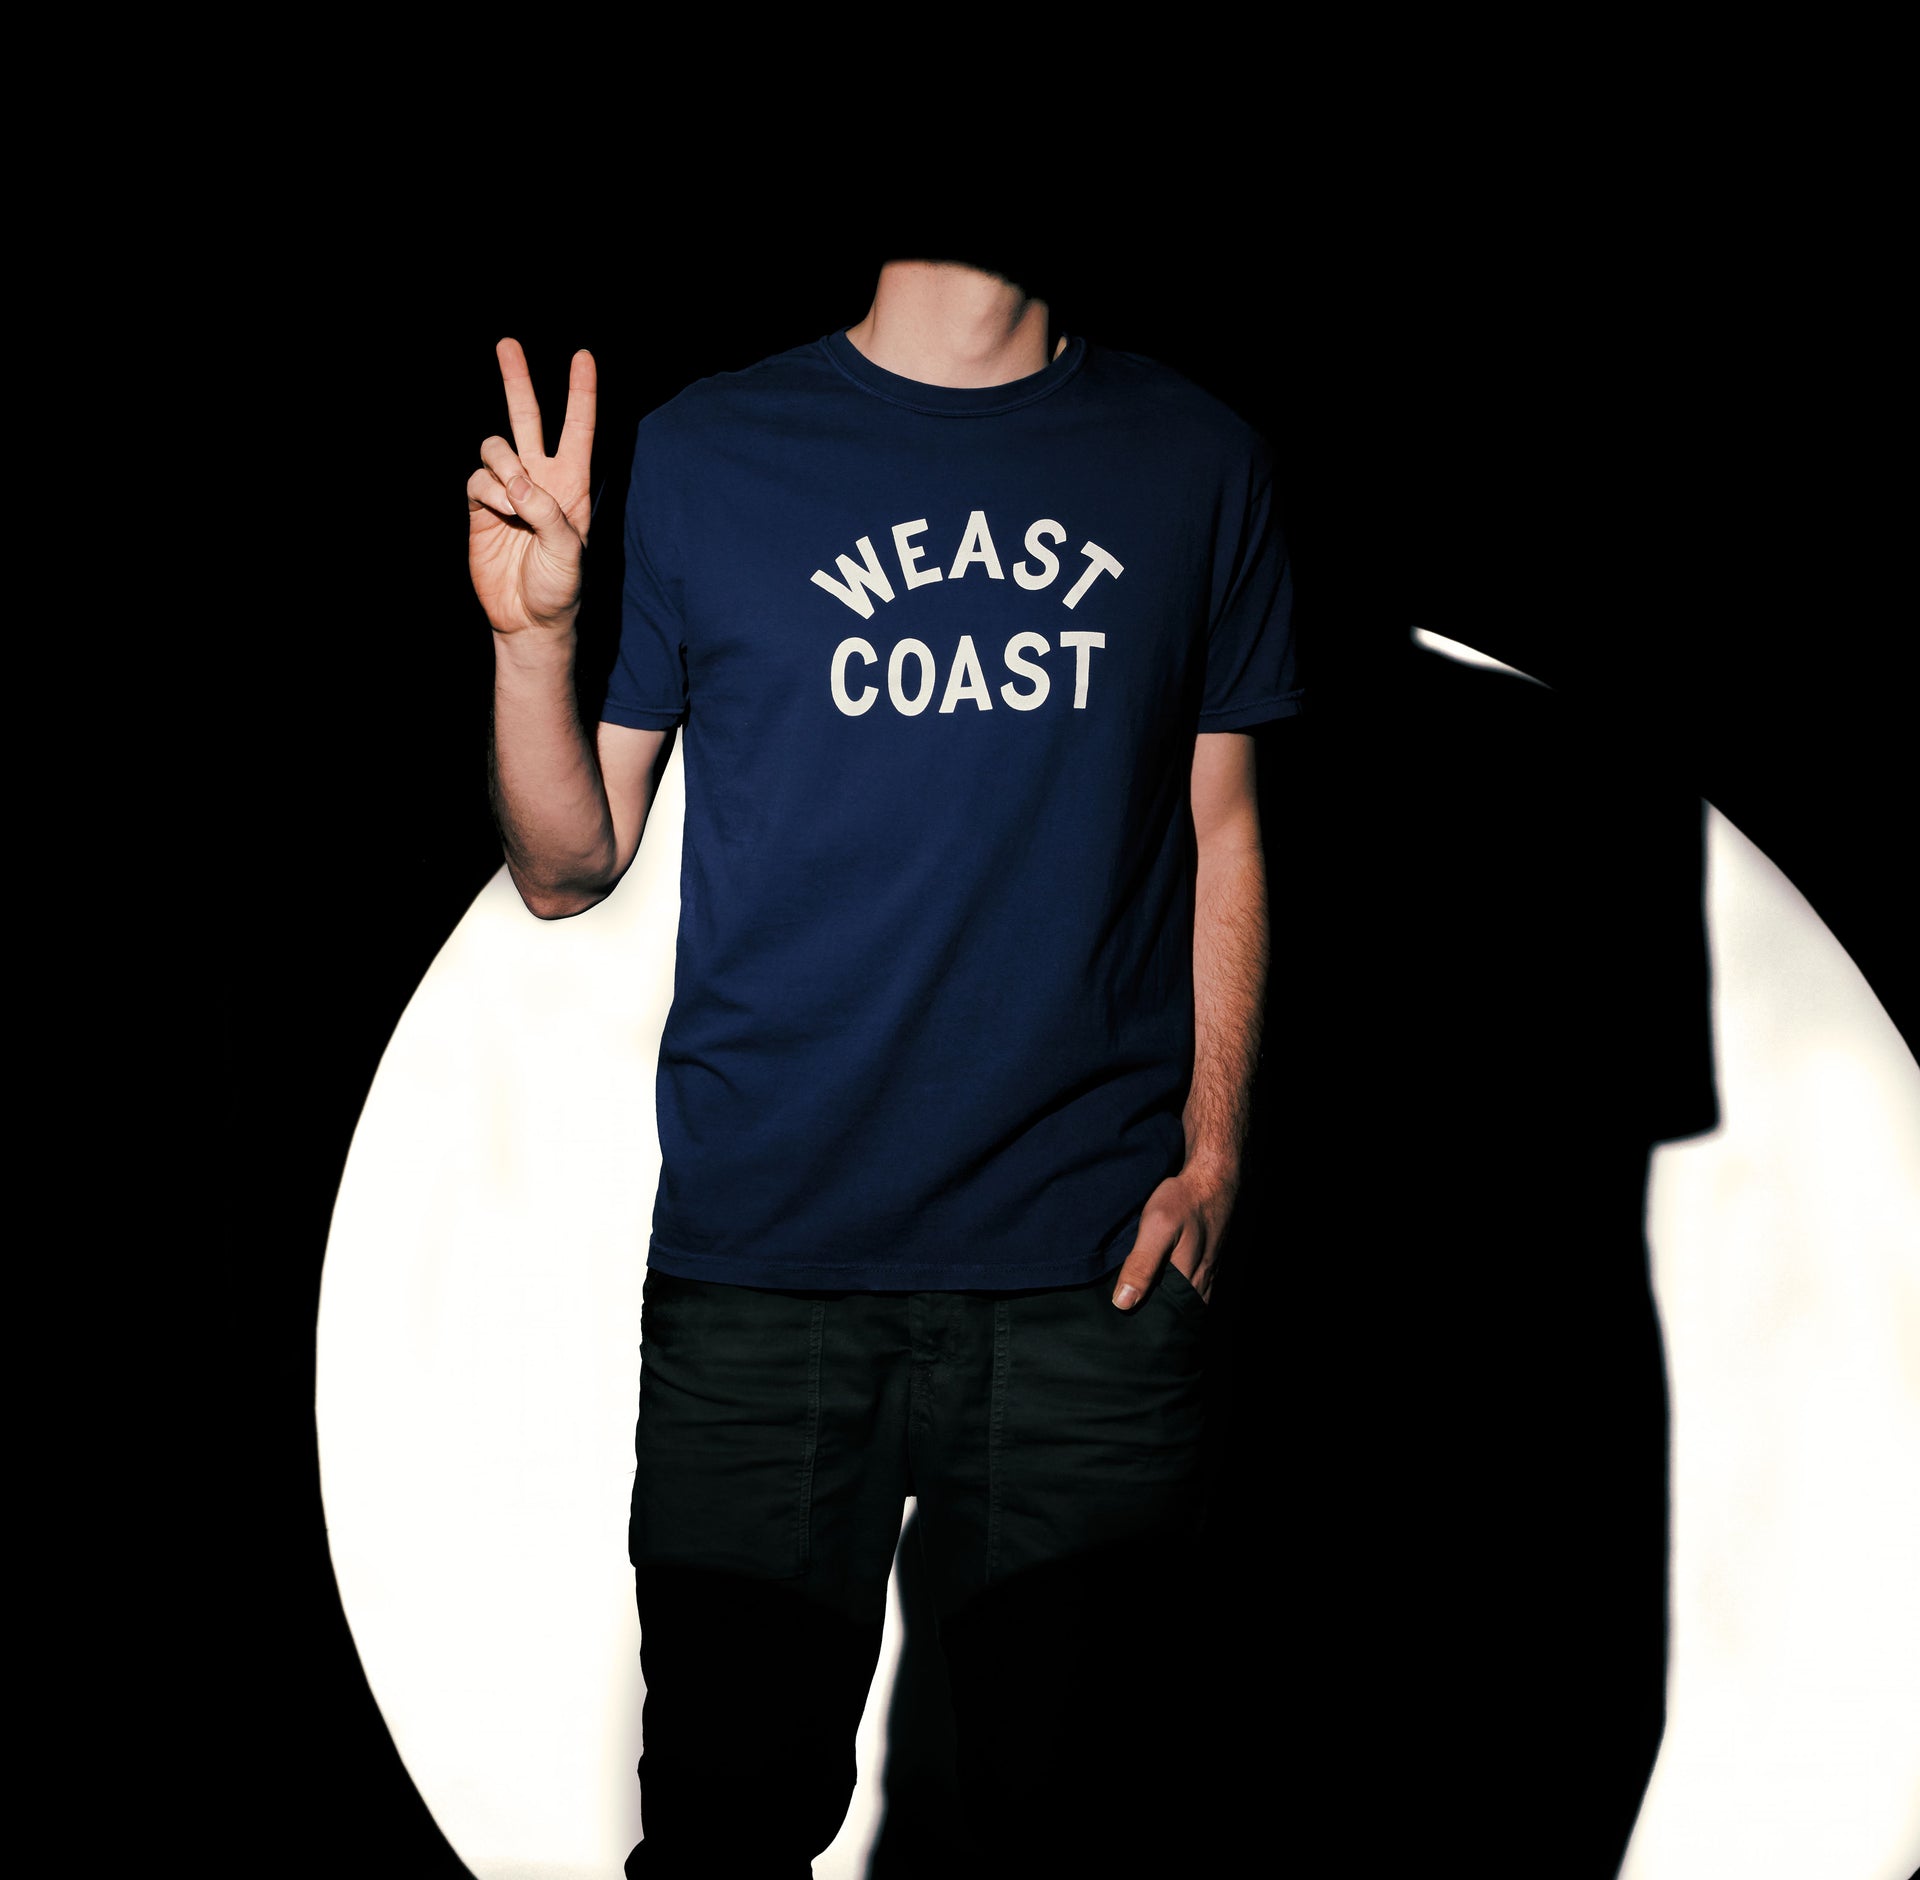 model wearing Navy t-shirt with crackle print weast coast arched letters